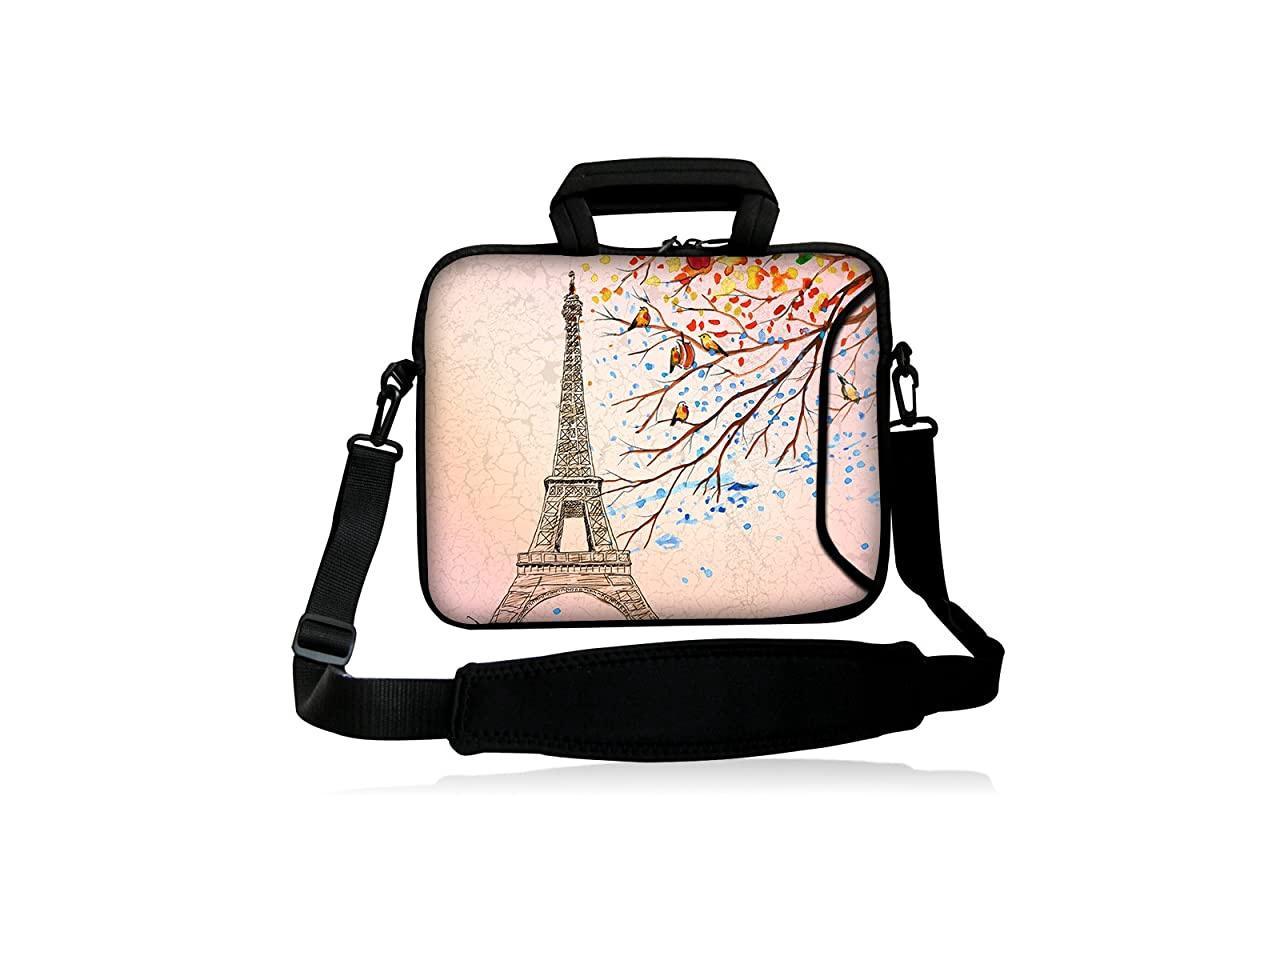 Business Briefcase Protective Bag Eiffel Tower in Paris3 Fashion Waterproof Laptop Sleeve 13 Inch 15inch Works with Any Brand of Laptop. 